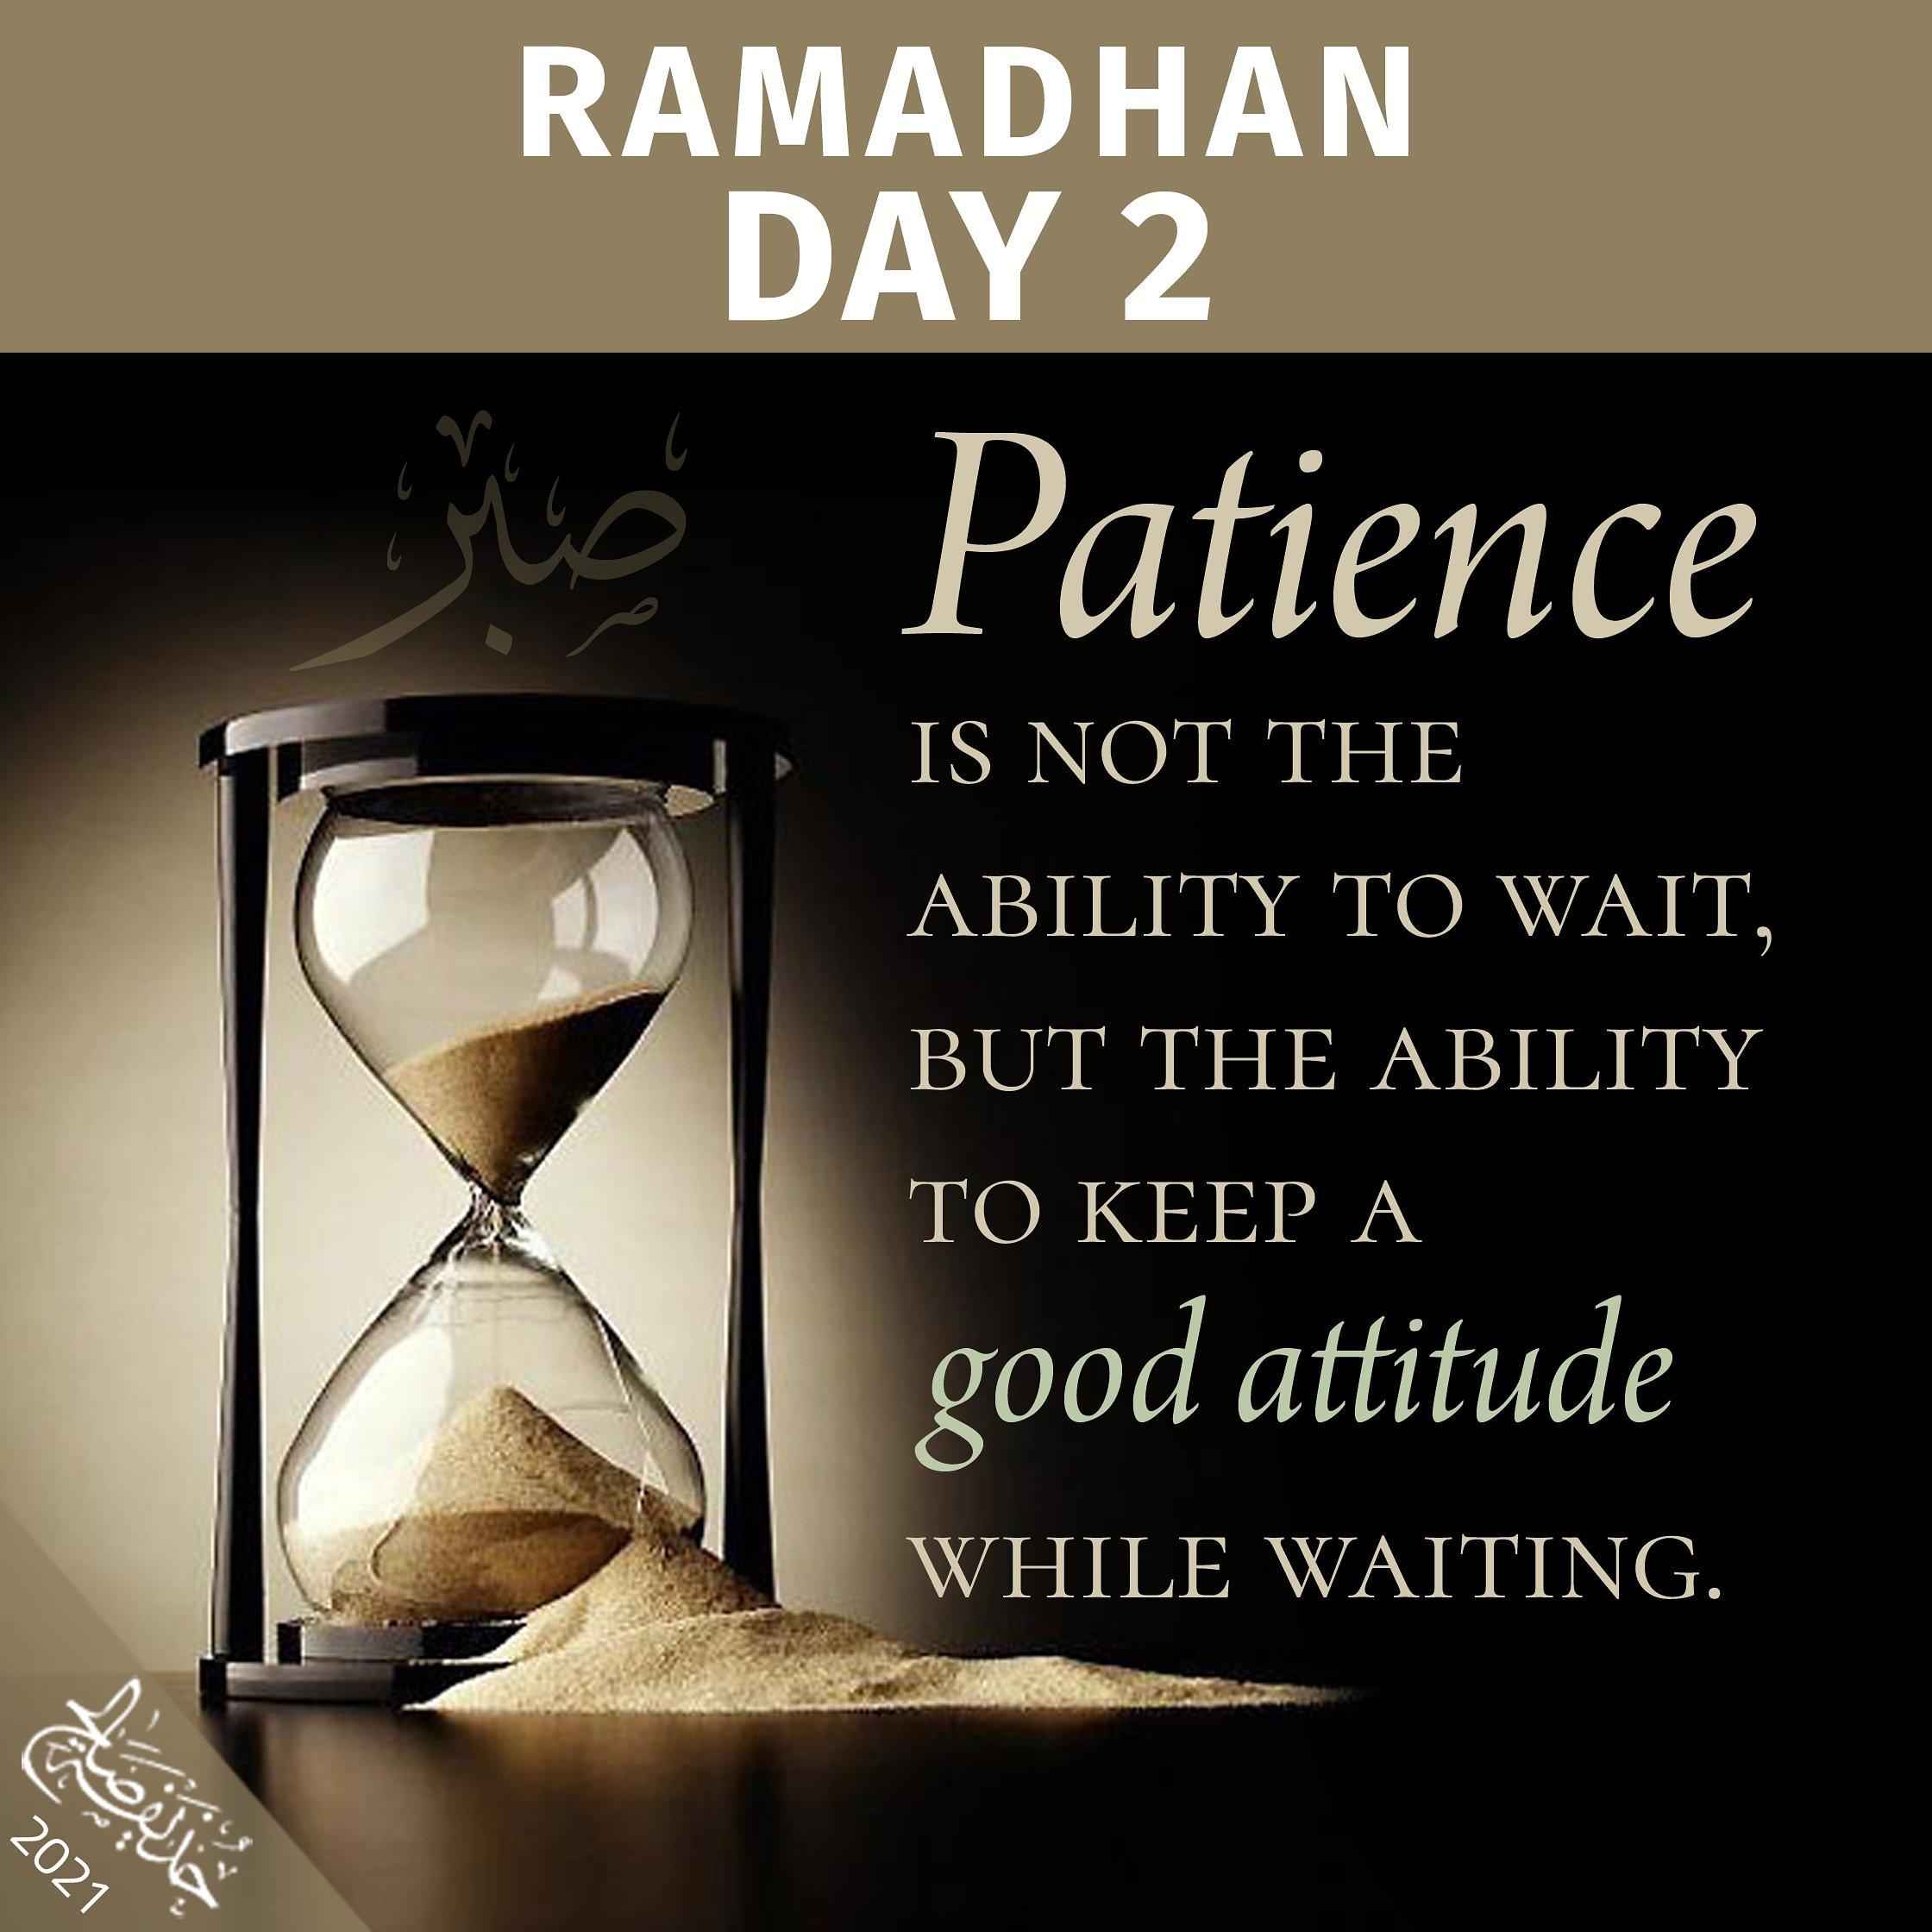 Ey53pWHXIAMypAlformatjpgname4096x4096 1 - Daily Ramadhan Reminders (2021)